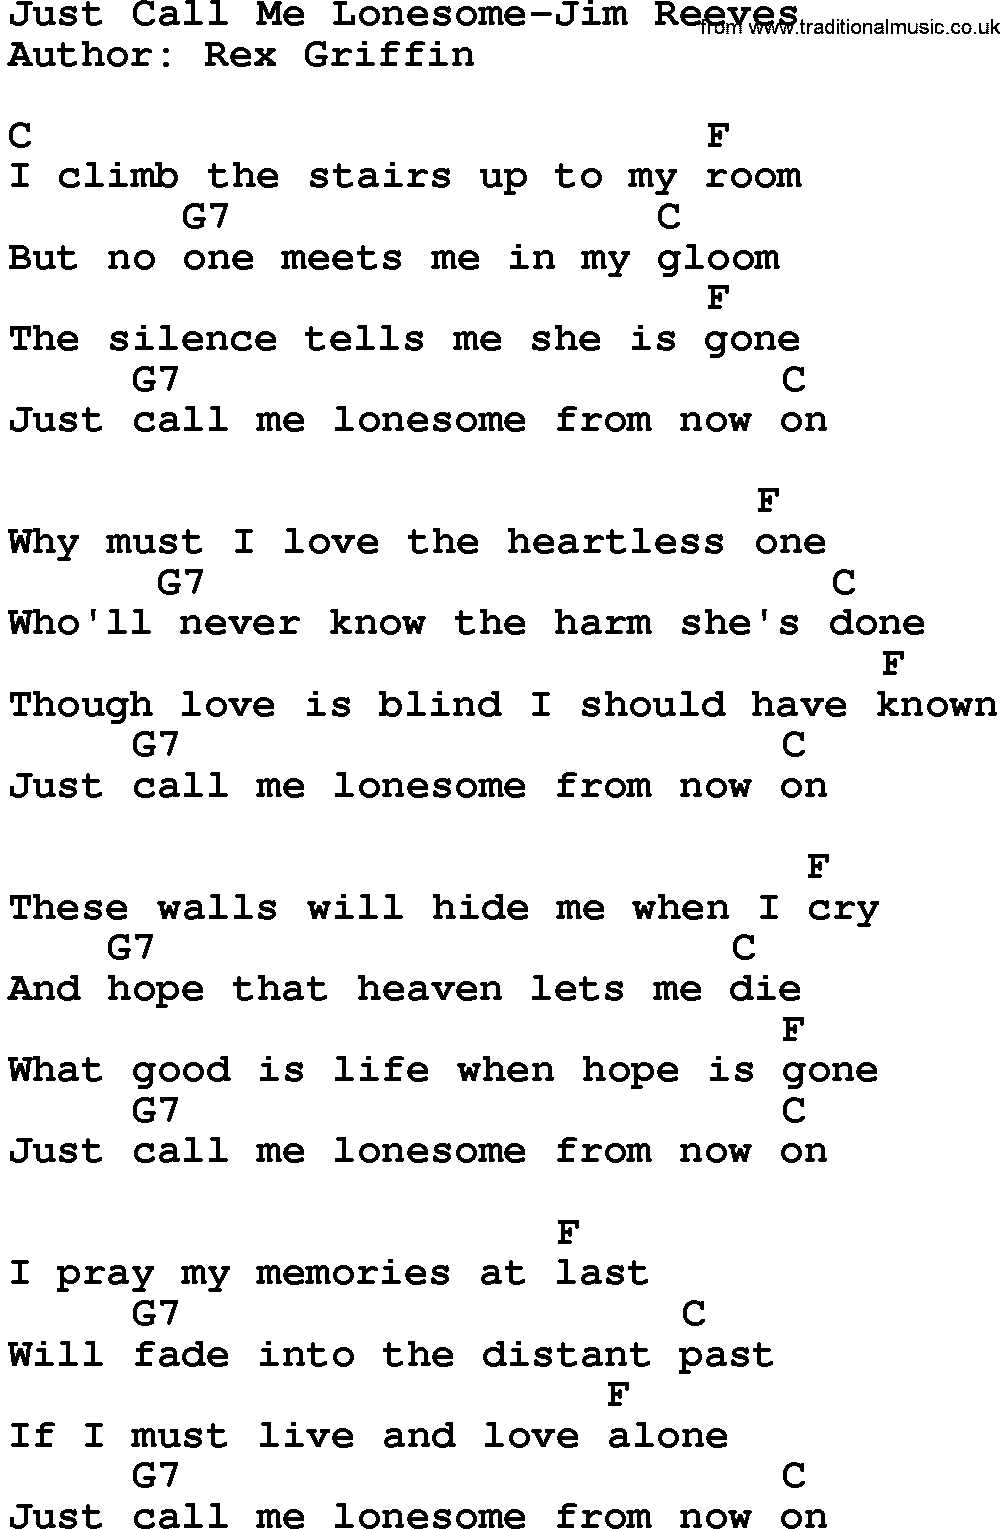 Country music song: Just Call Me Lonesome-Jim Reeves lyrics and chords